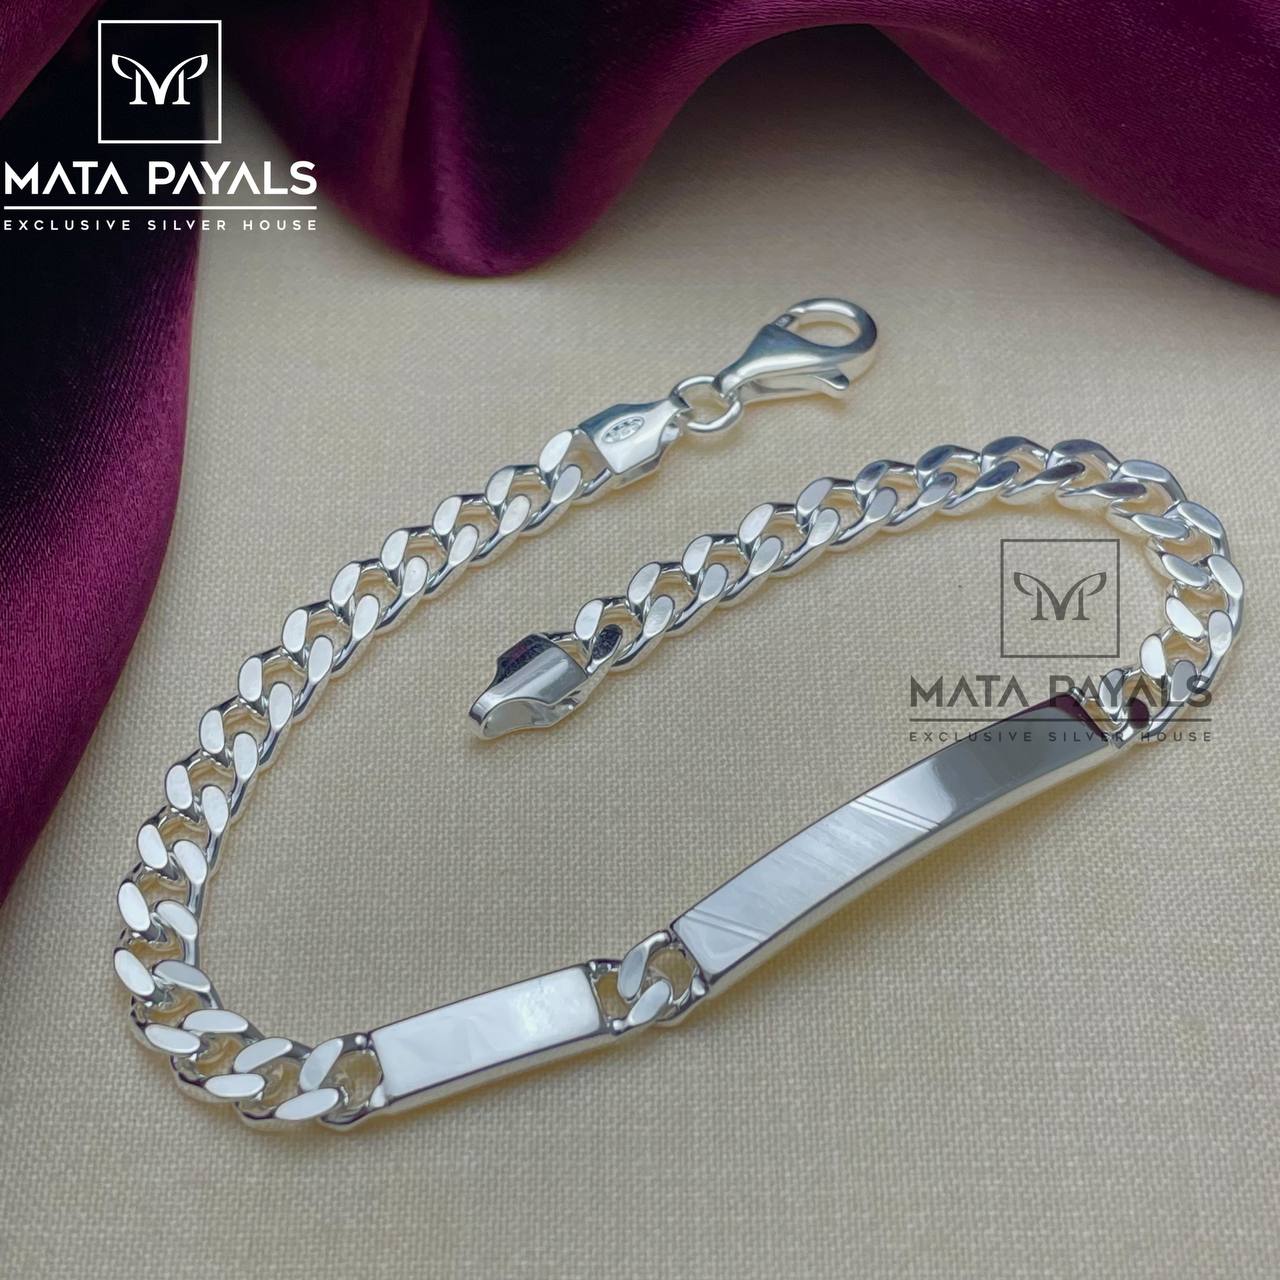 Exclusive Silver Necklace Chain Bracelet Silver Plated Stainless Steel  Chain Style Silver Bracelet For Men Boys Men's Bracelets 8.5 Inches